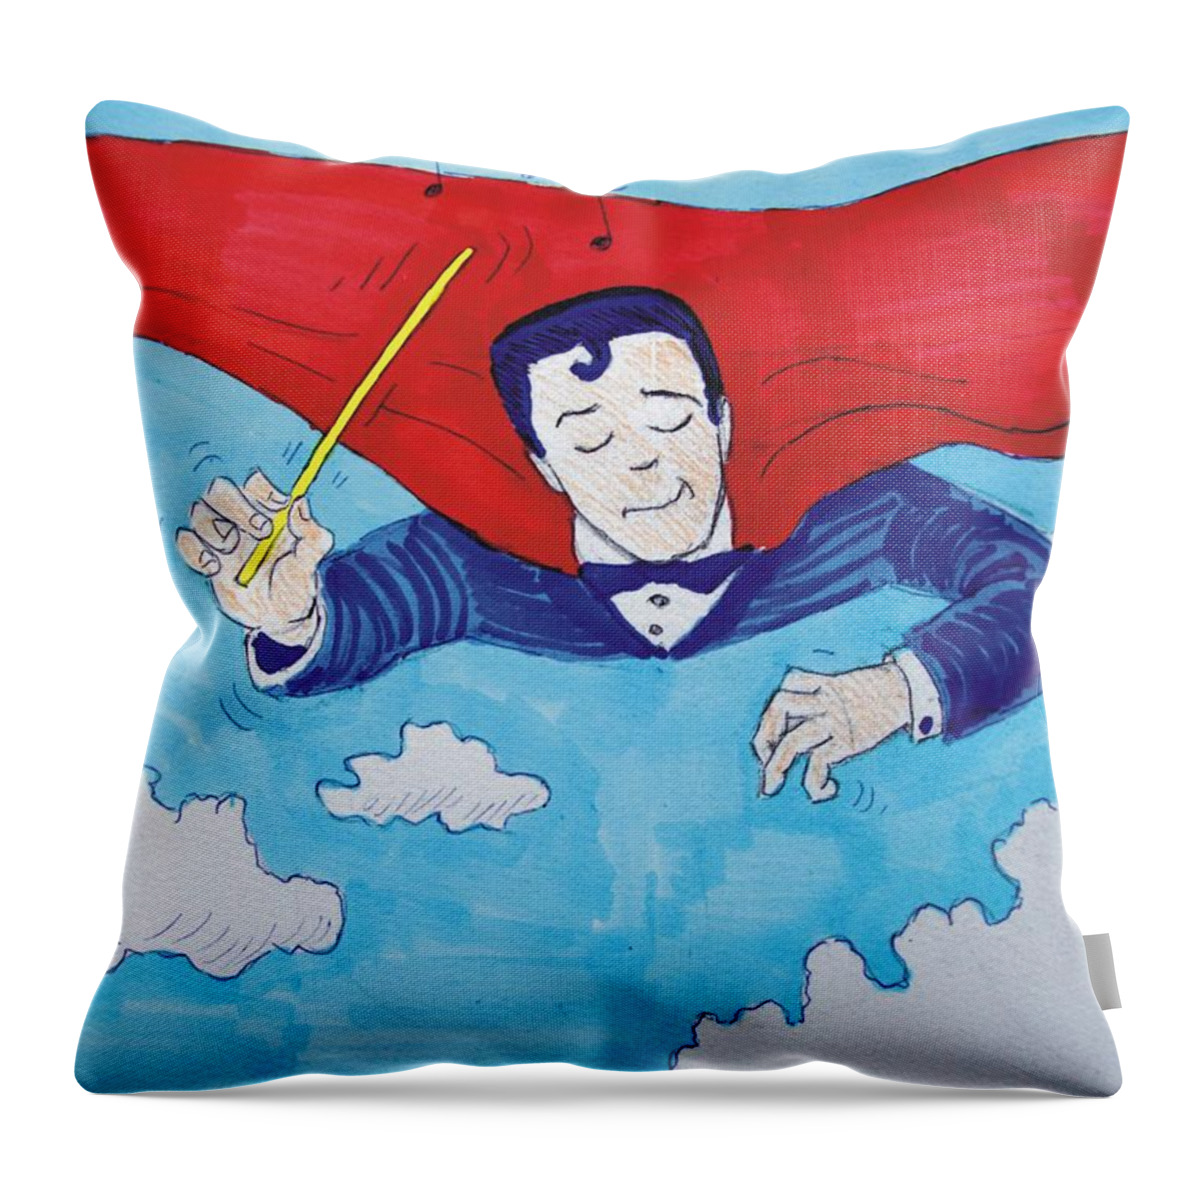 Super Throw Pillow featuring the drawing Superconductor by Mike Jory